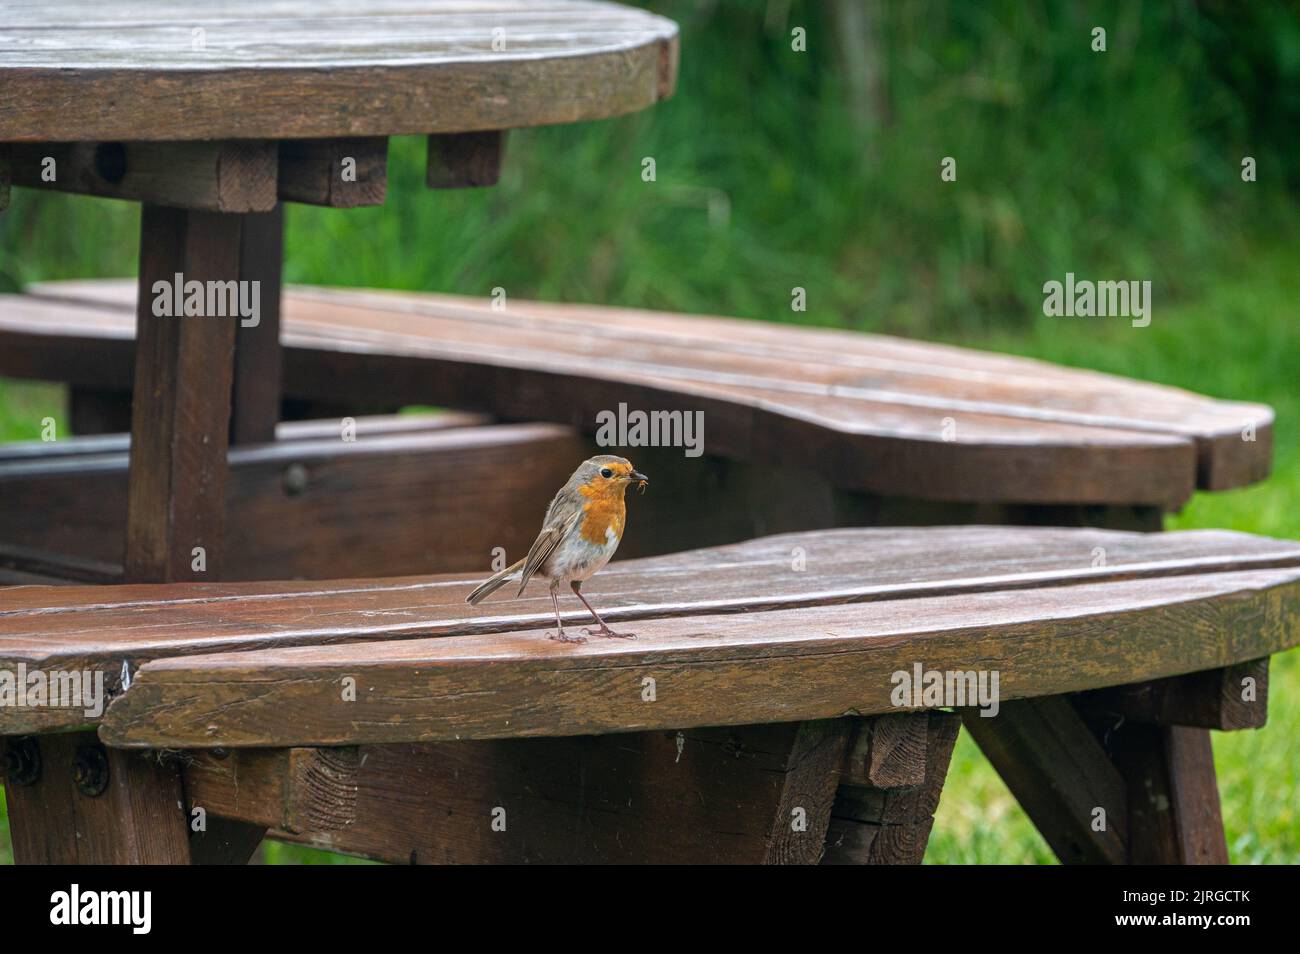 Robin bird with insect and bread in beak Stock Photo